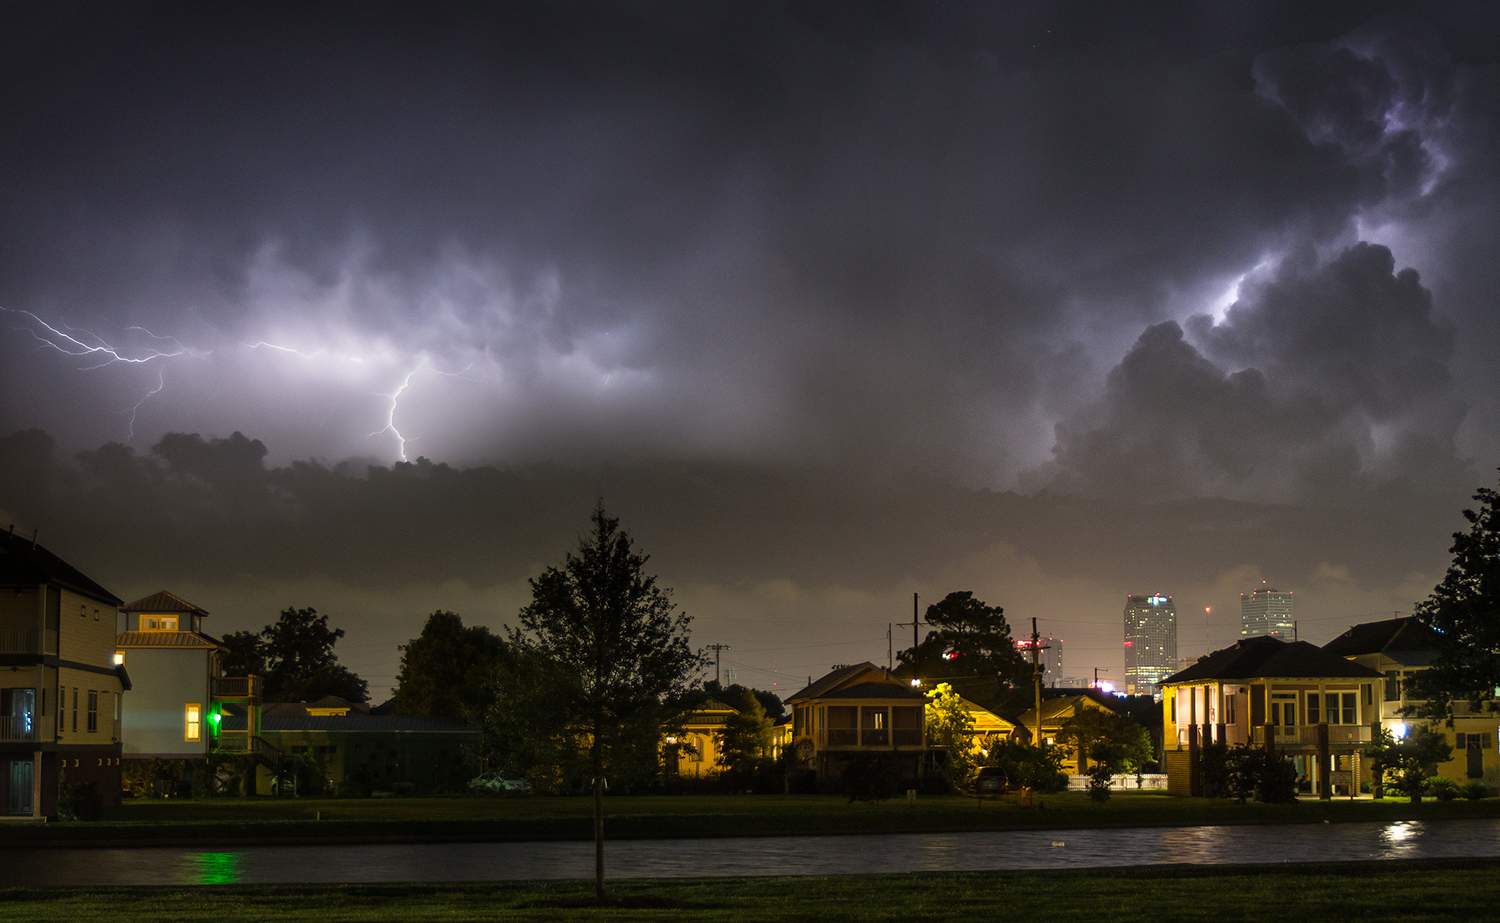 "Heat Lightning over New Orleans" © Kevin O'Mara; Creative Commons license